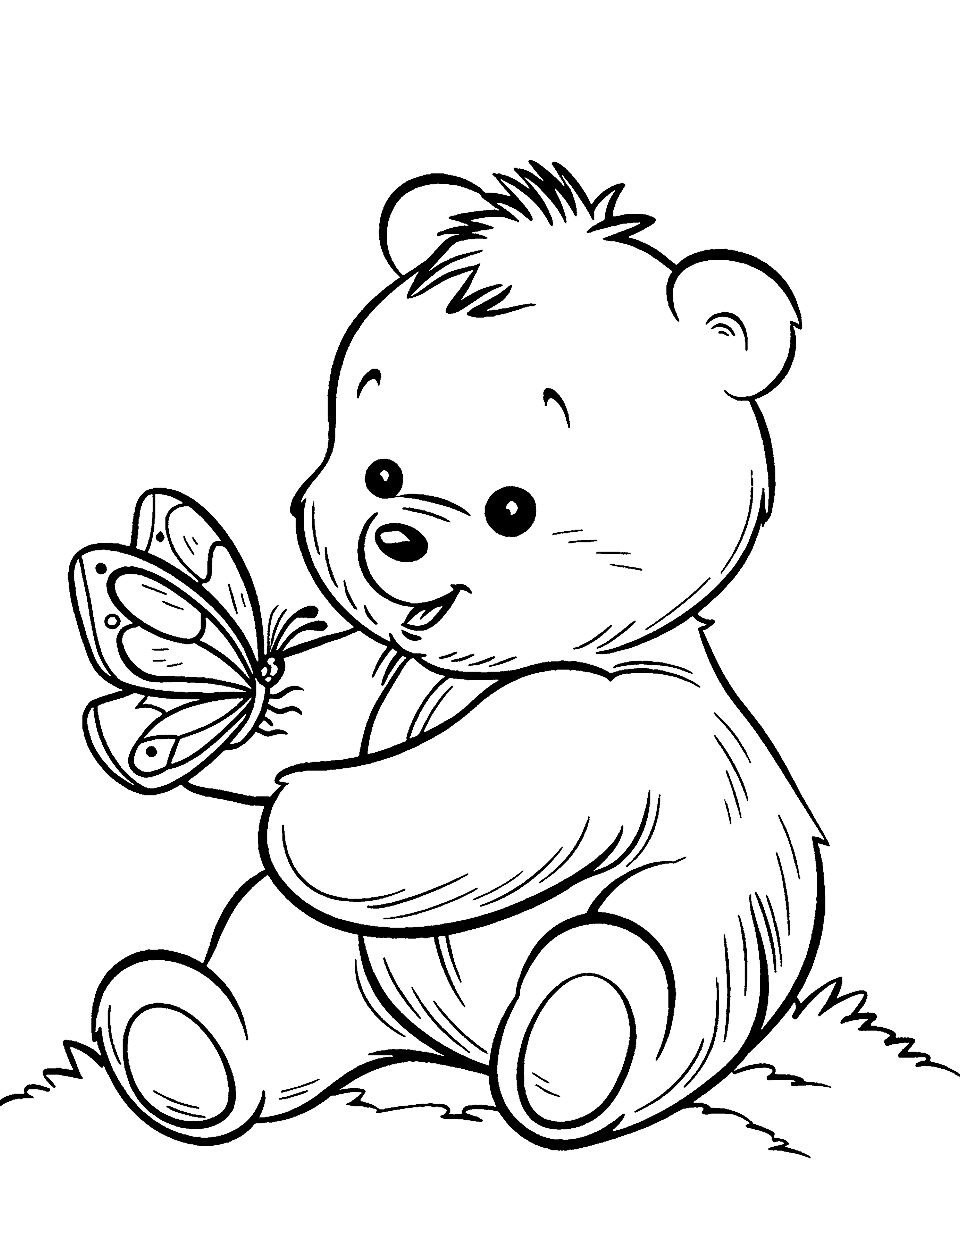 Teddy Bear and a Butterfly Coloring Page - A teddy bear gently holding a butterfly on its paw.